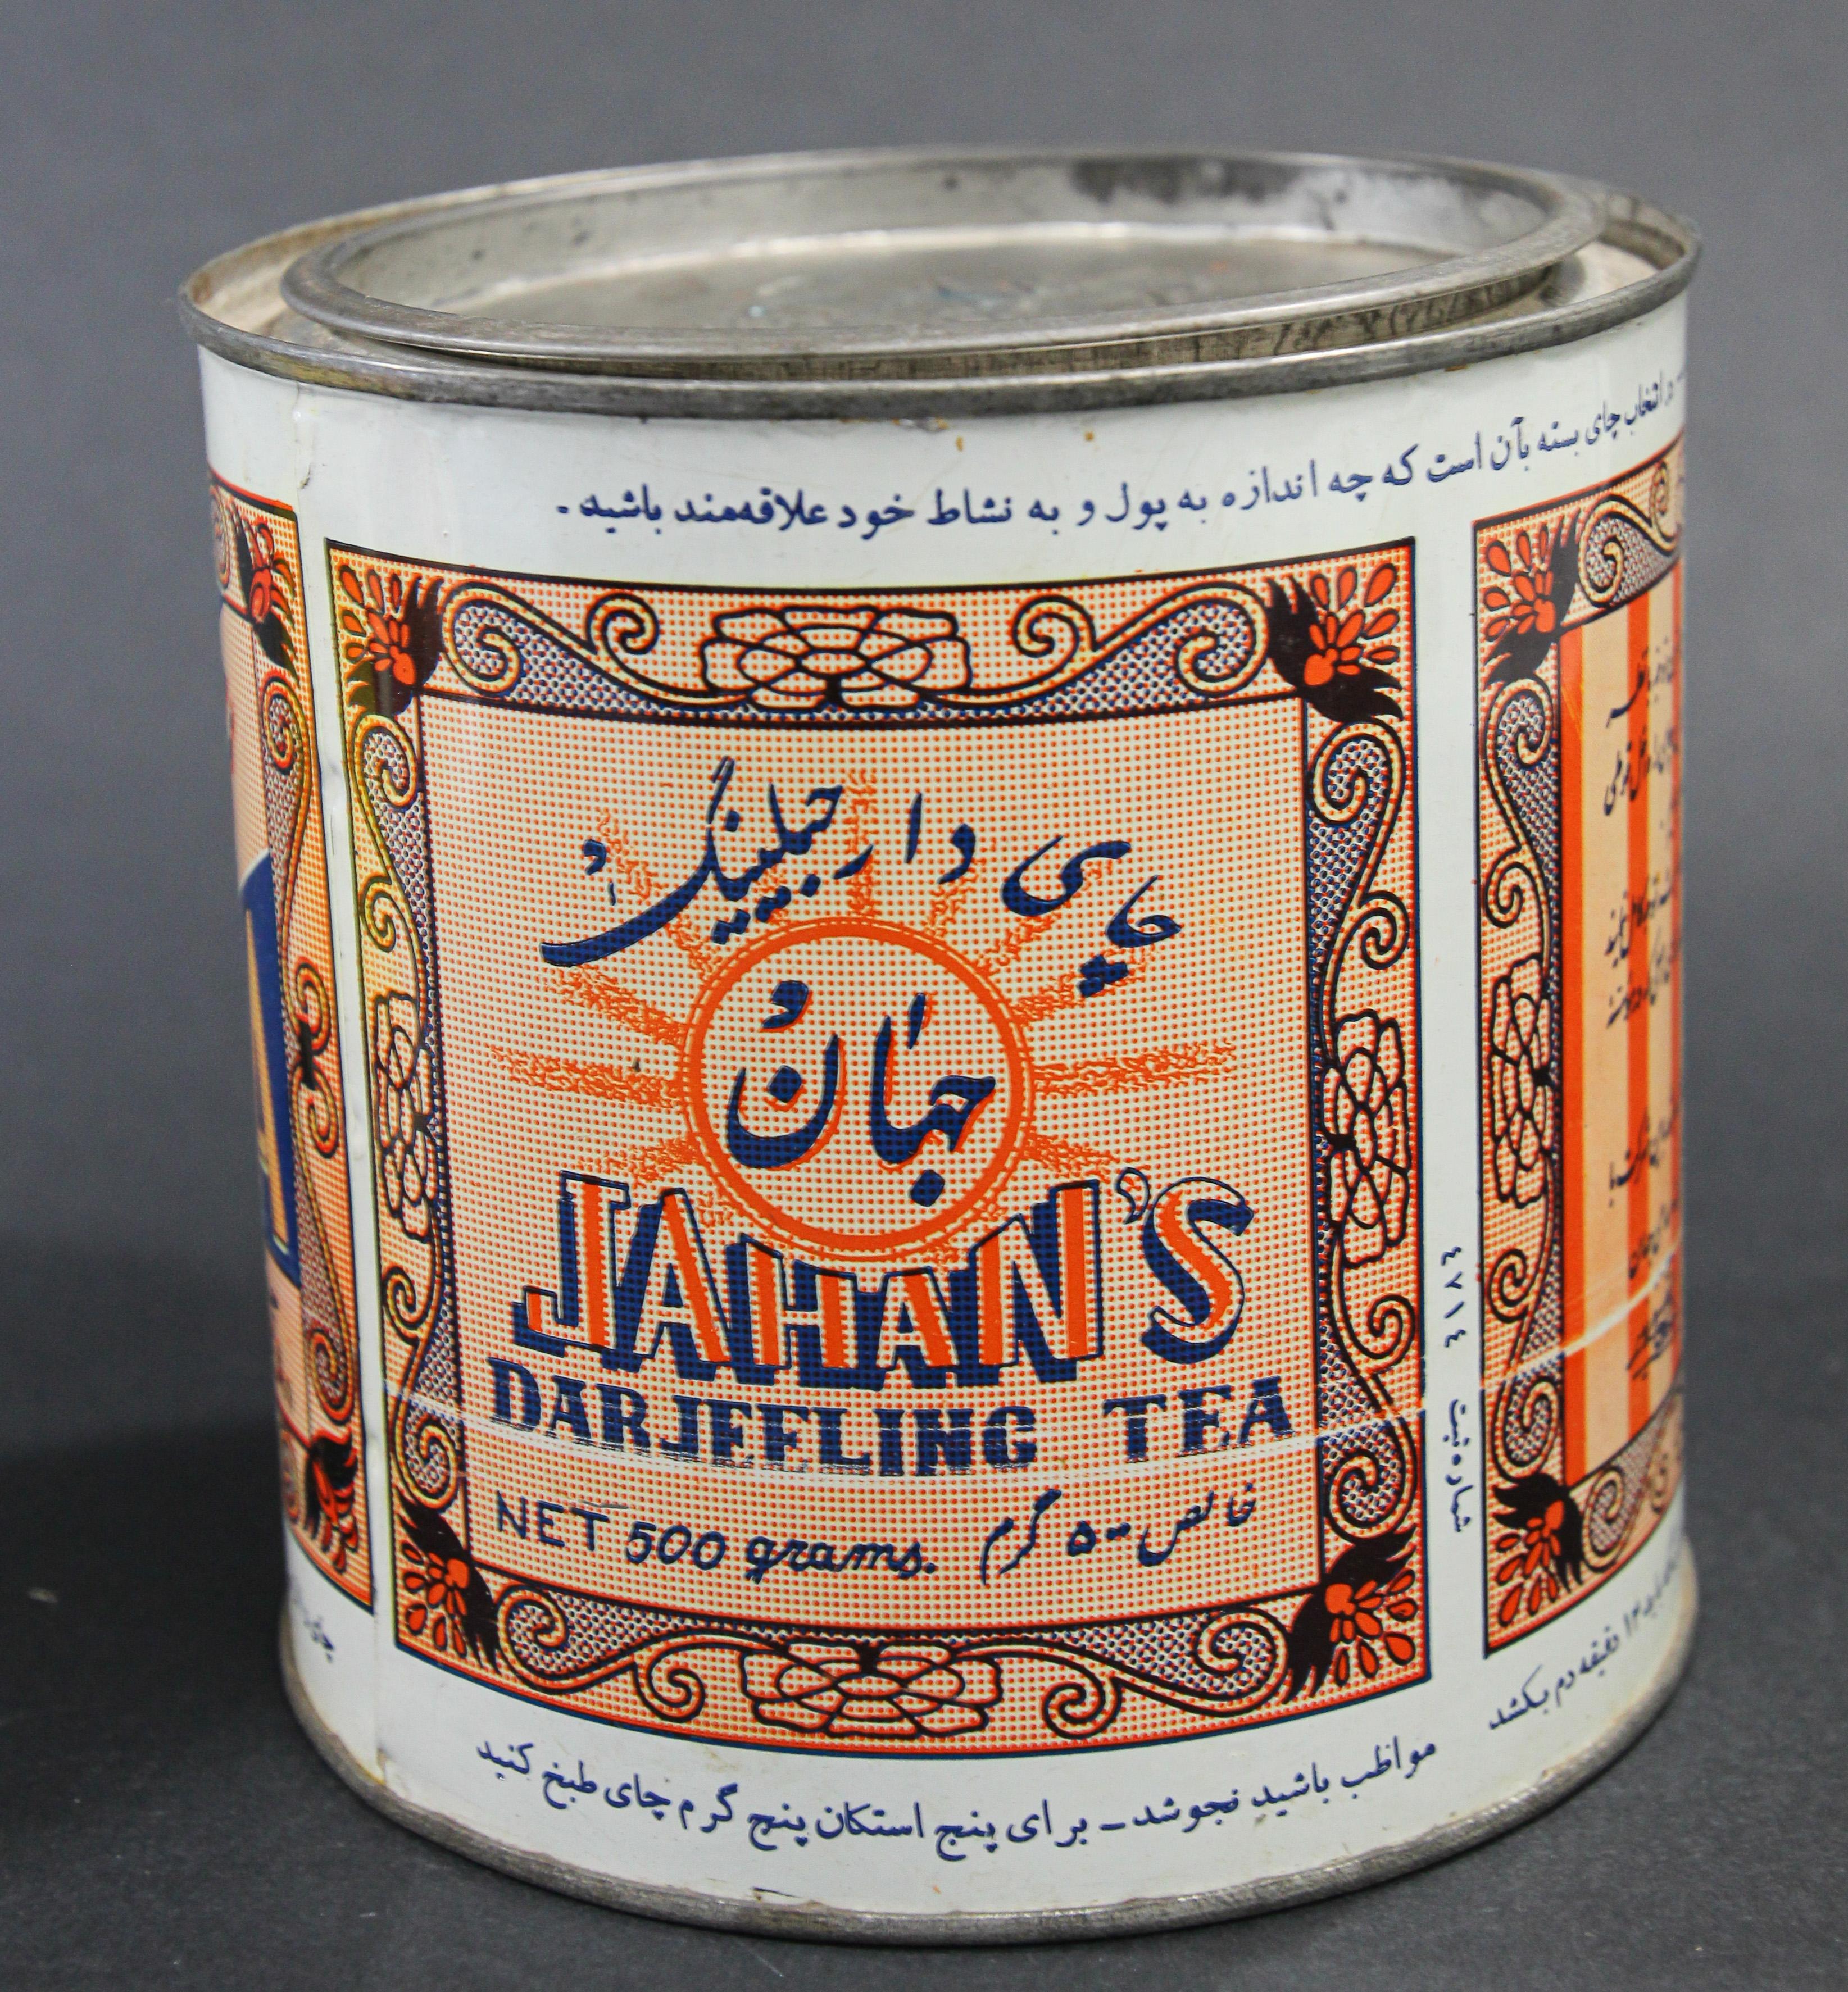 Vintage Collectible Tin Canister Jahan's Darjeeling Tea from India 6